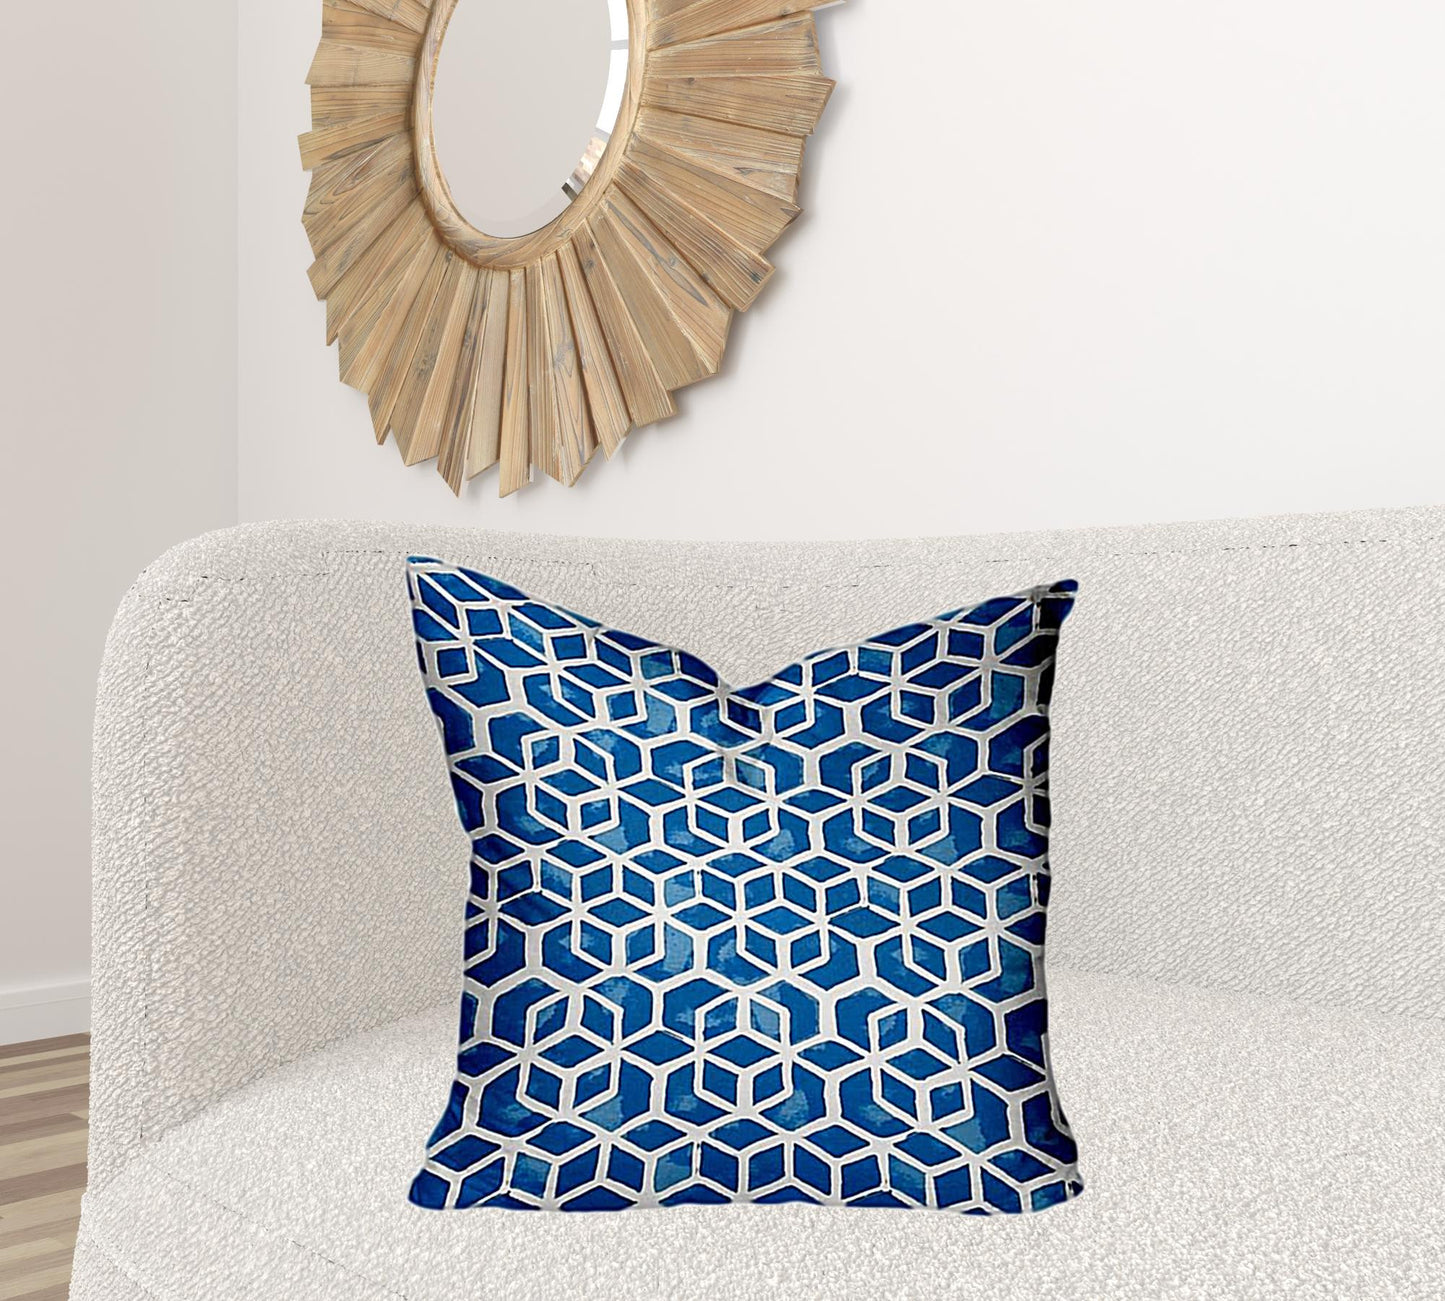 24" X 24" Blue And White Enveloped Geometric Throw Indoor Outdoor Pillow